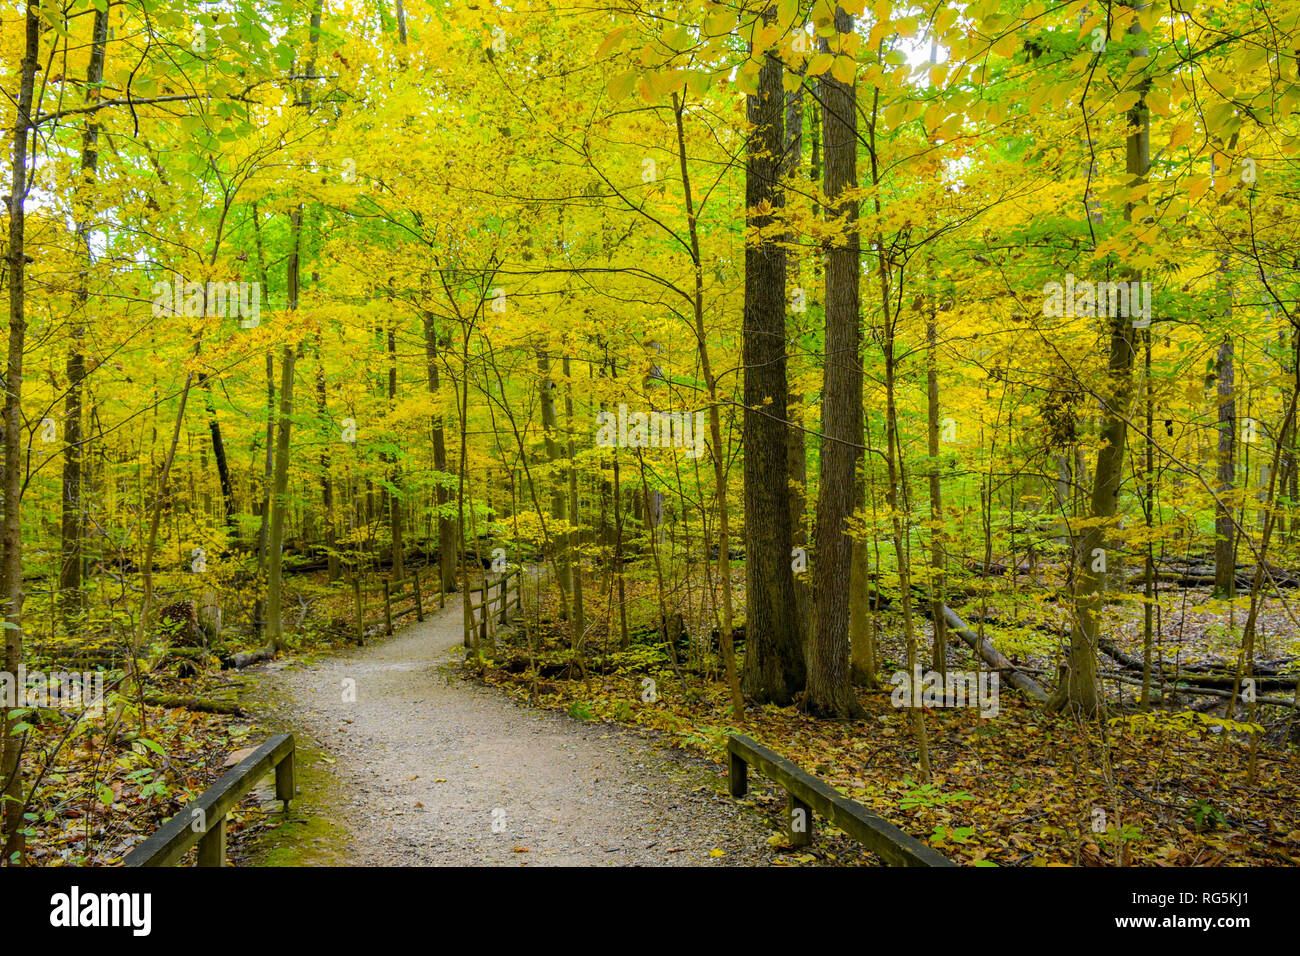 A hike through the woods on a winding path. Breathtaking views of the fall foliage surrounds me. Tall trees line the path. Fallen leaves surround. Stock Photo